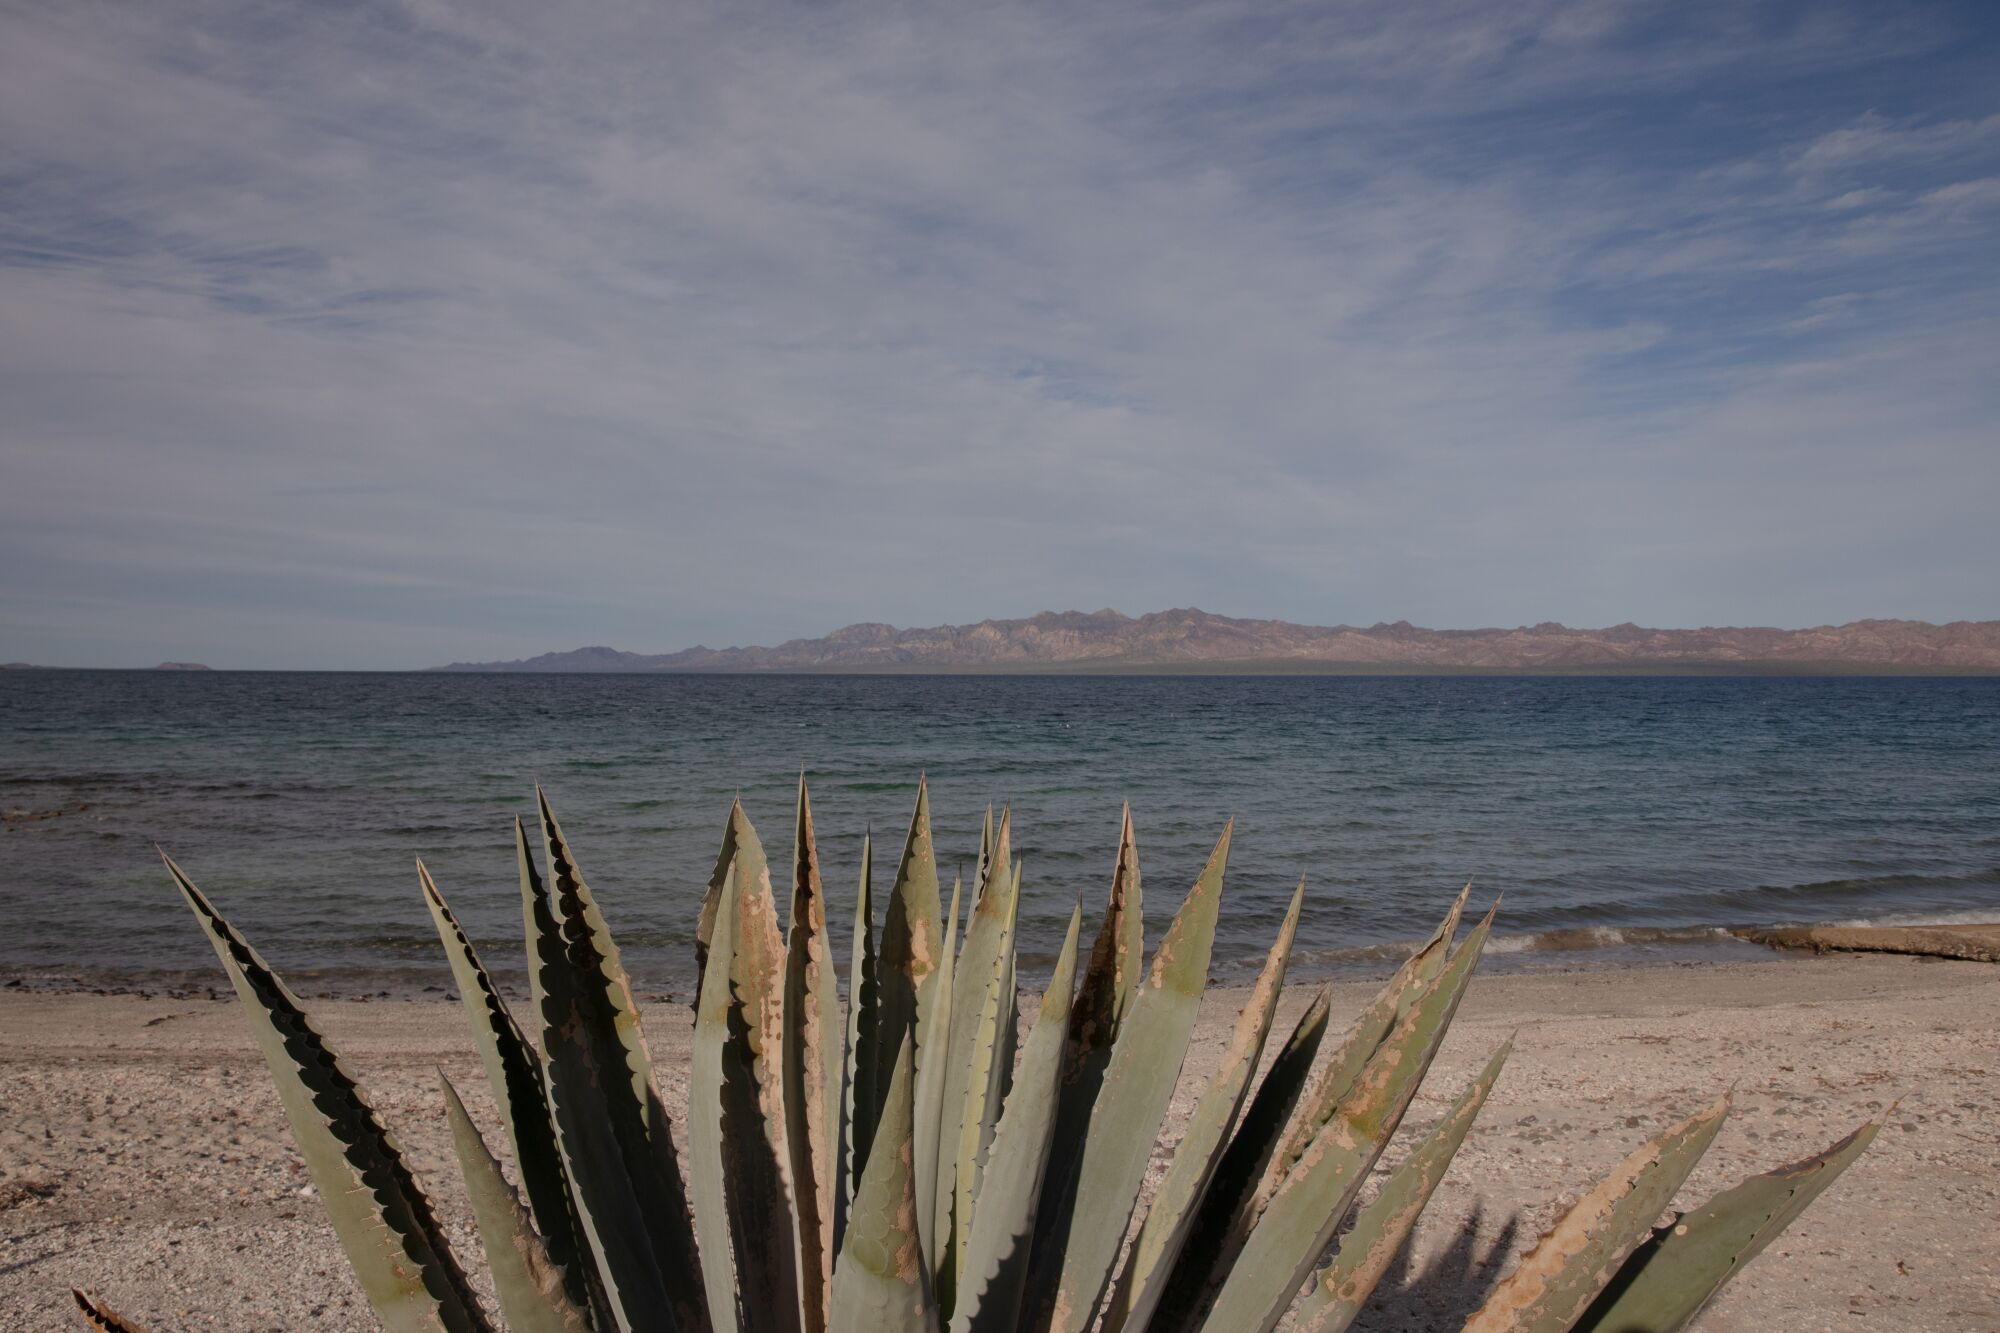 A spiky aloe-like cactus in the foreground, with a view of a bay in the background, on a sunny day.